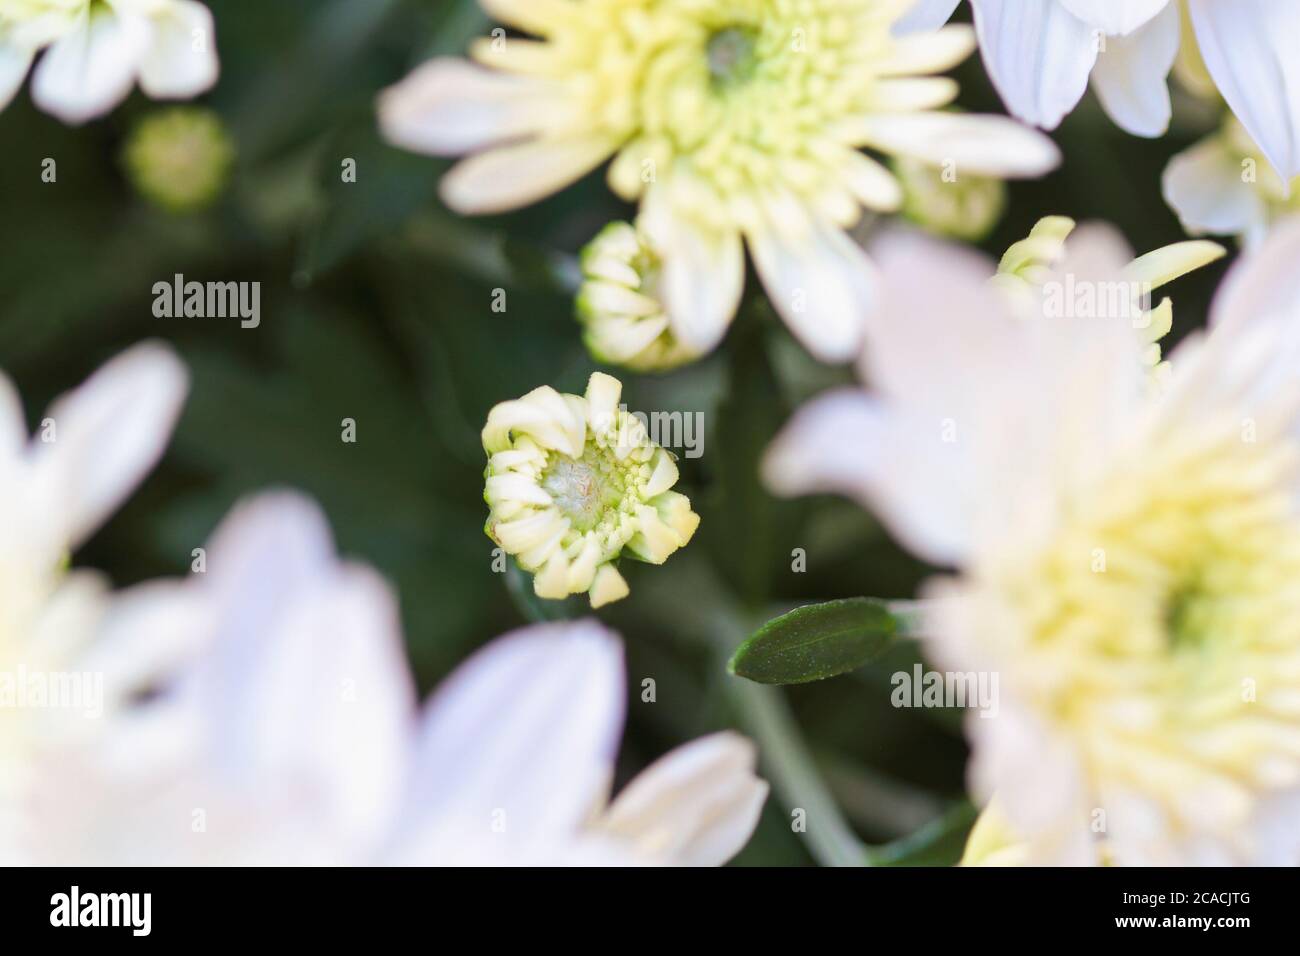 Close up of white Chrysanthemum bud and flowers with yellow centers. Selective focus with blurred foreground and background. Stock Photo